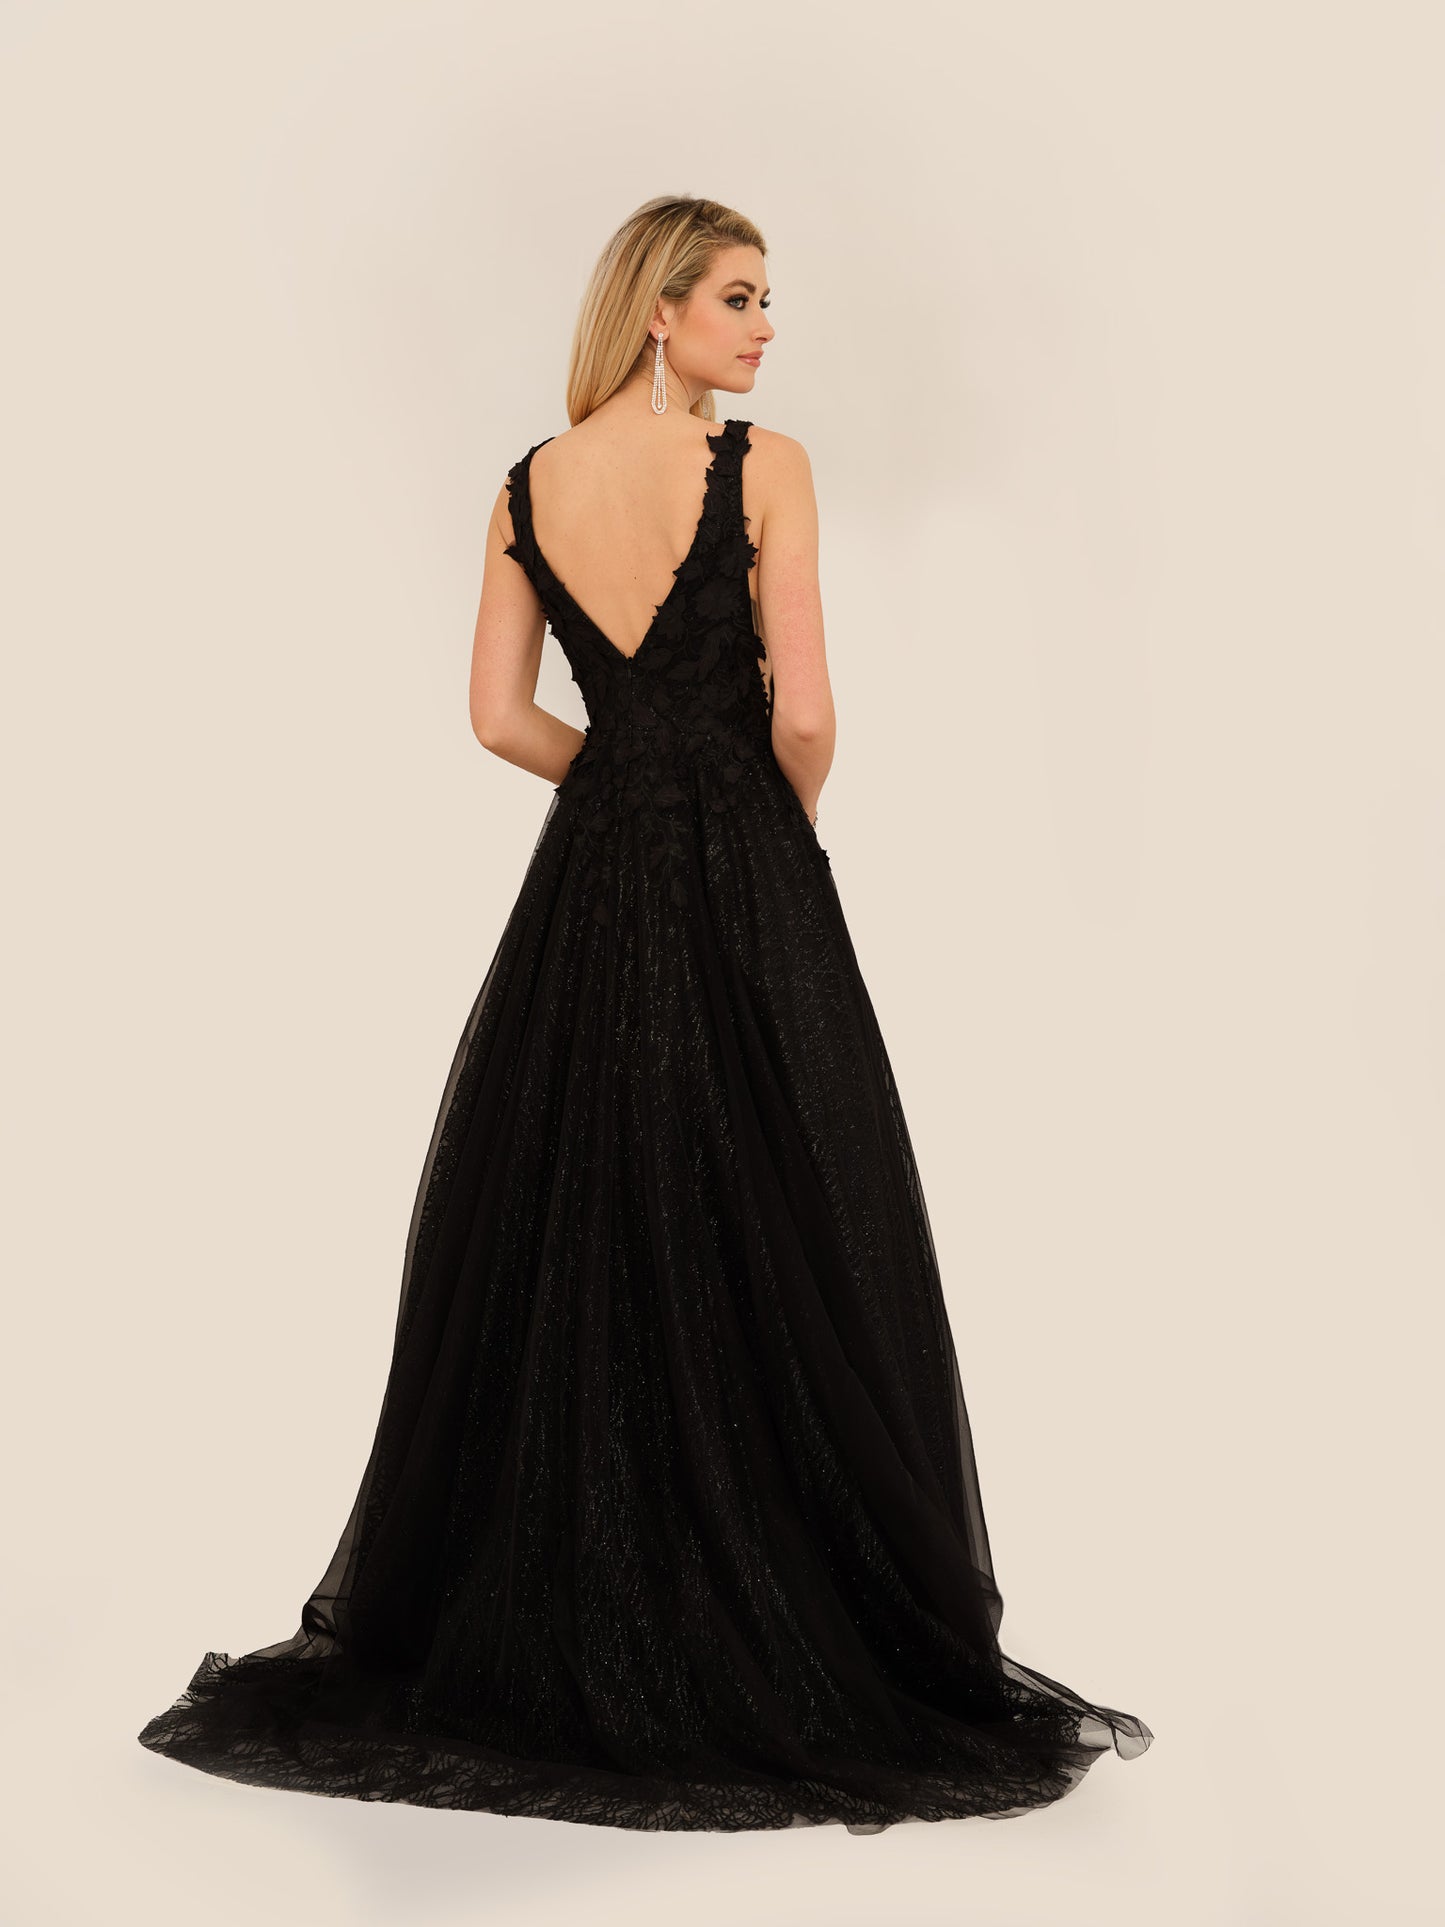 MESH AND LEAF DETAILED BACKLESS A-LINE GOWN